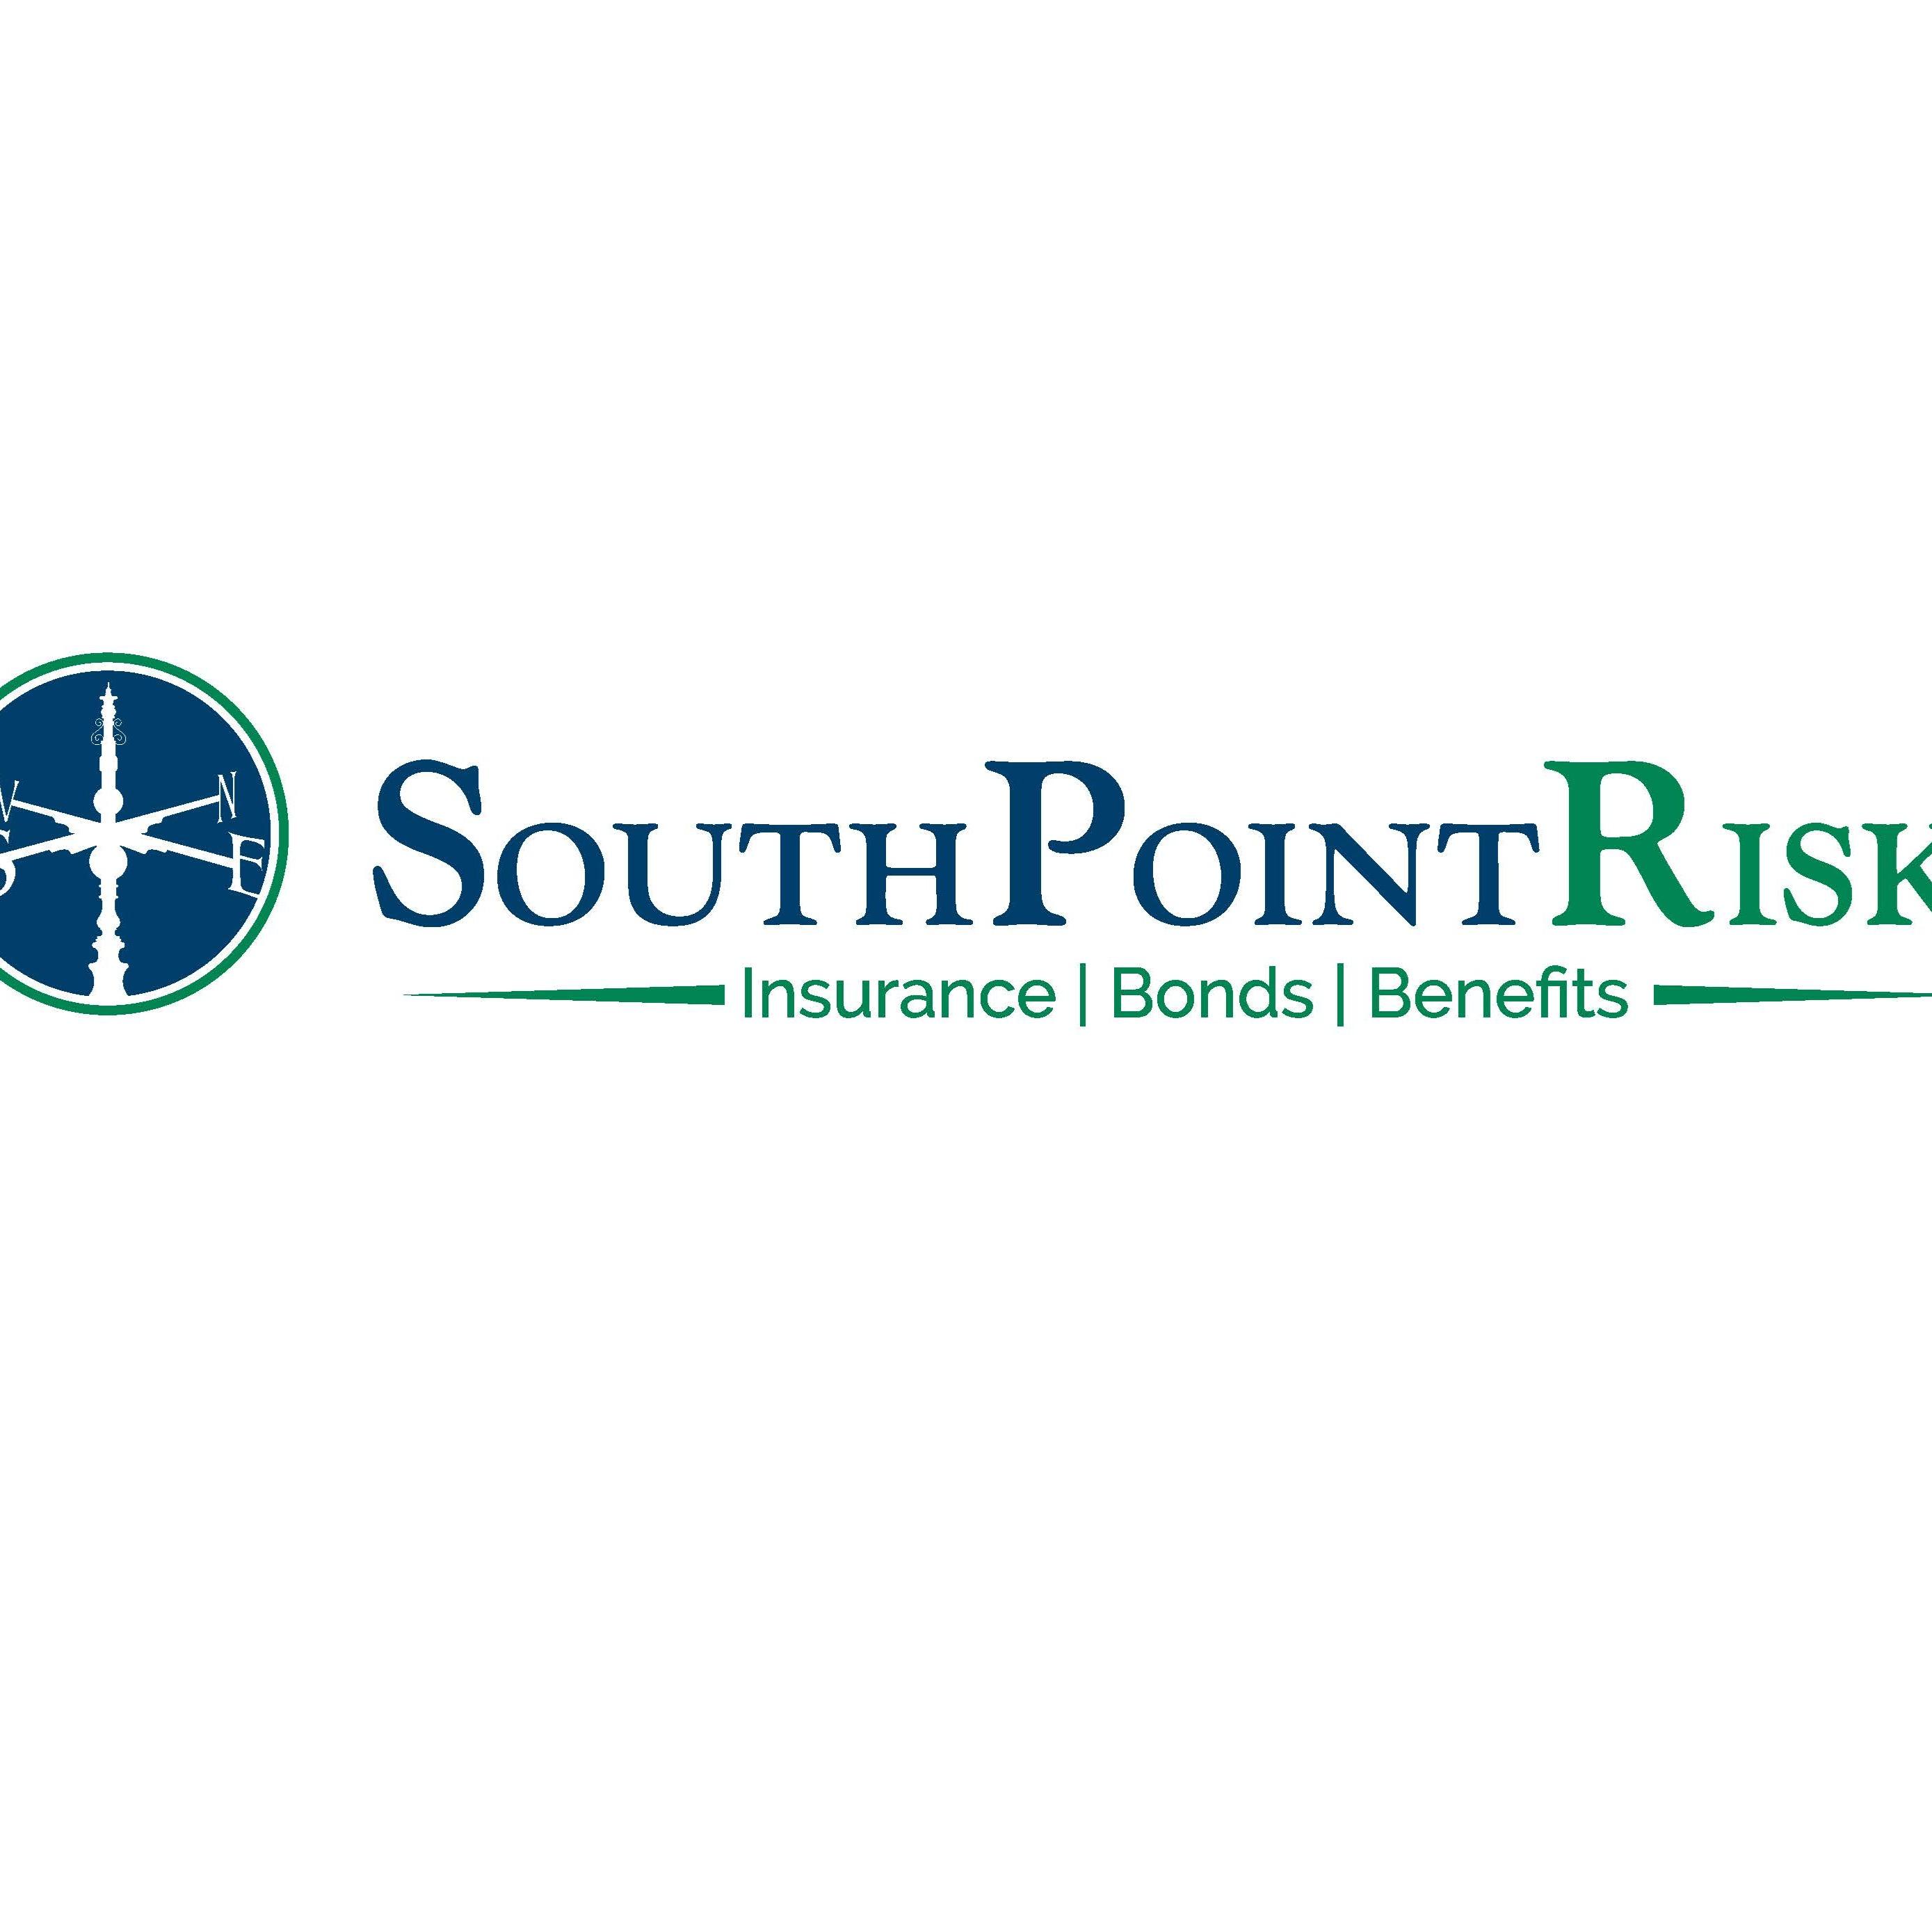 SouthPoint Risk - Maryville - Maryville, TN 37801 - (865)983-3872 | ShowMeLocal.com